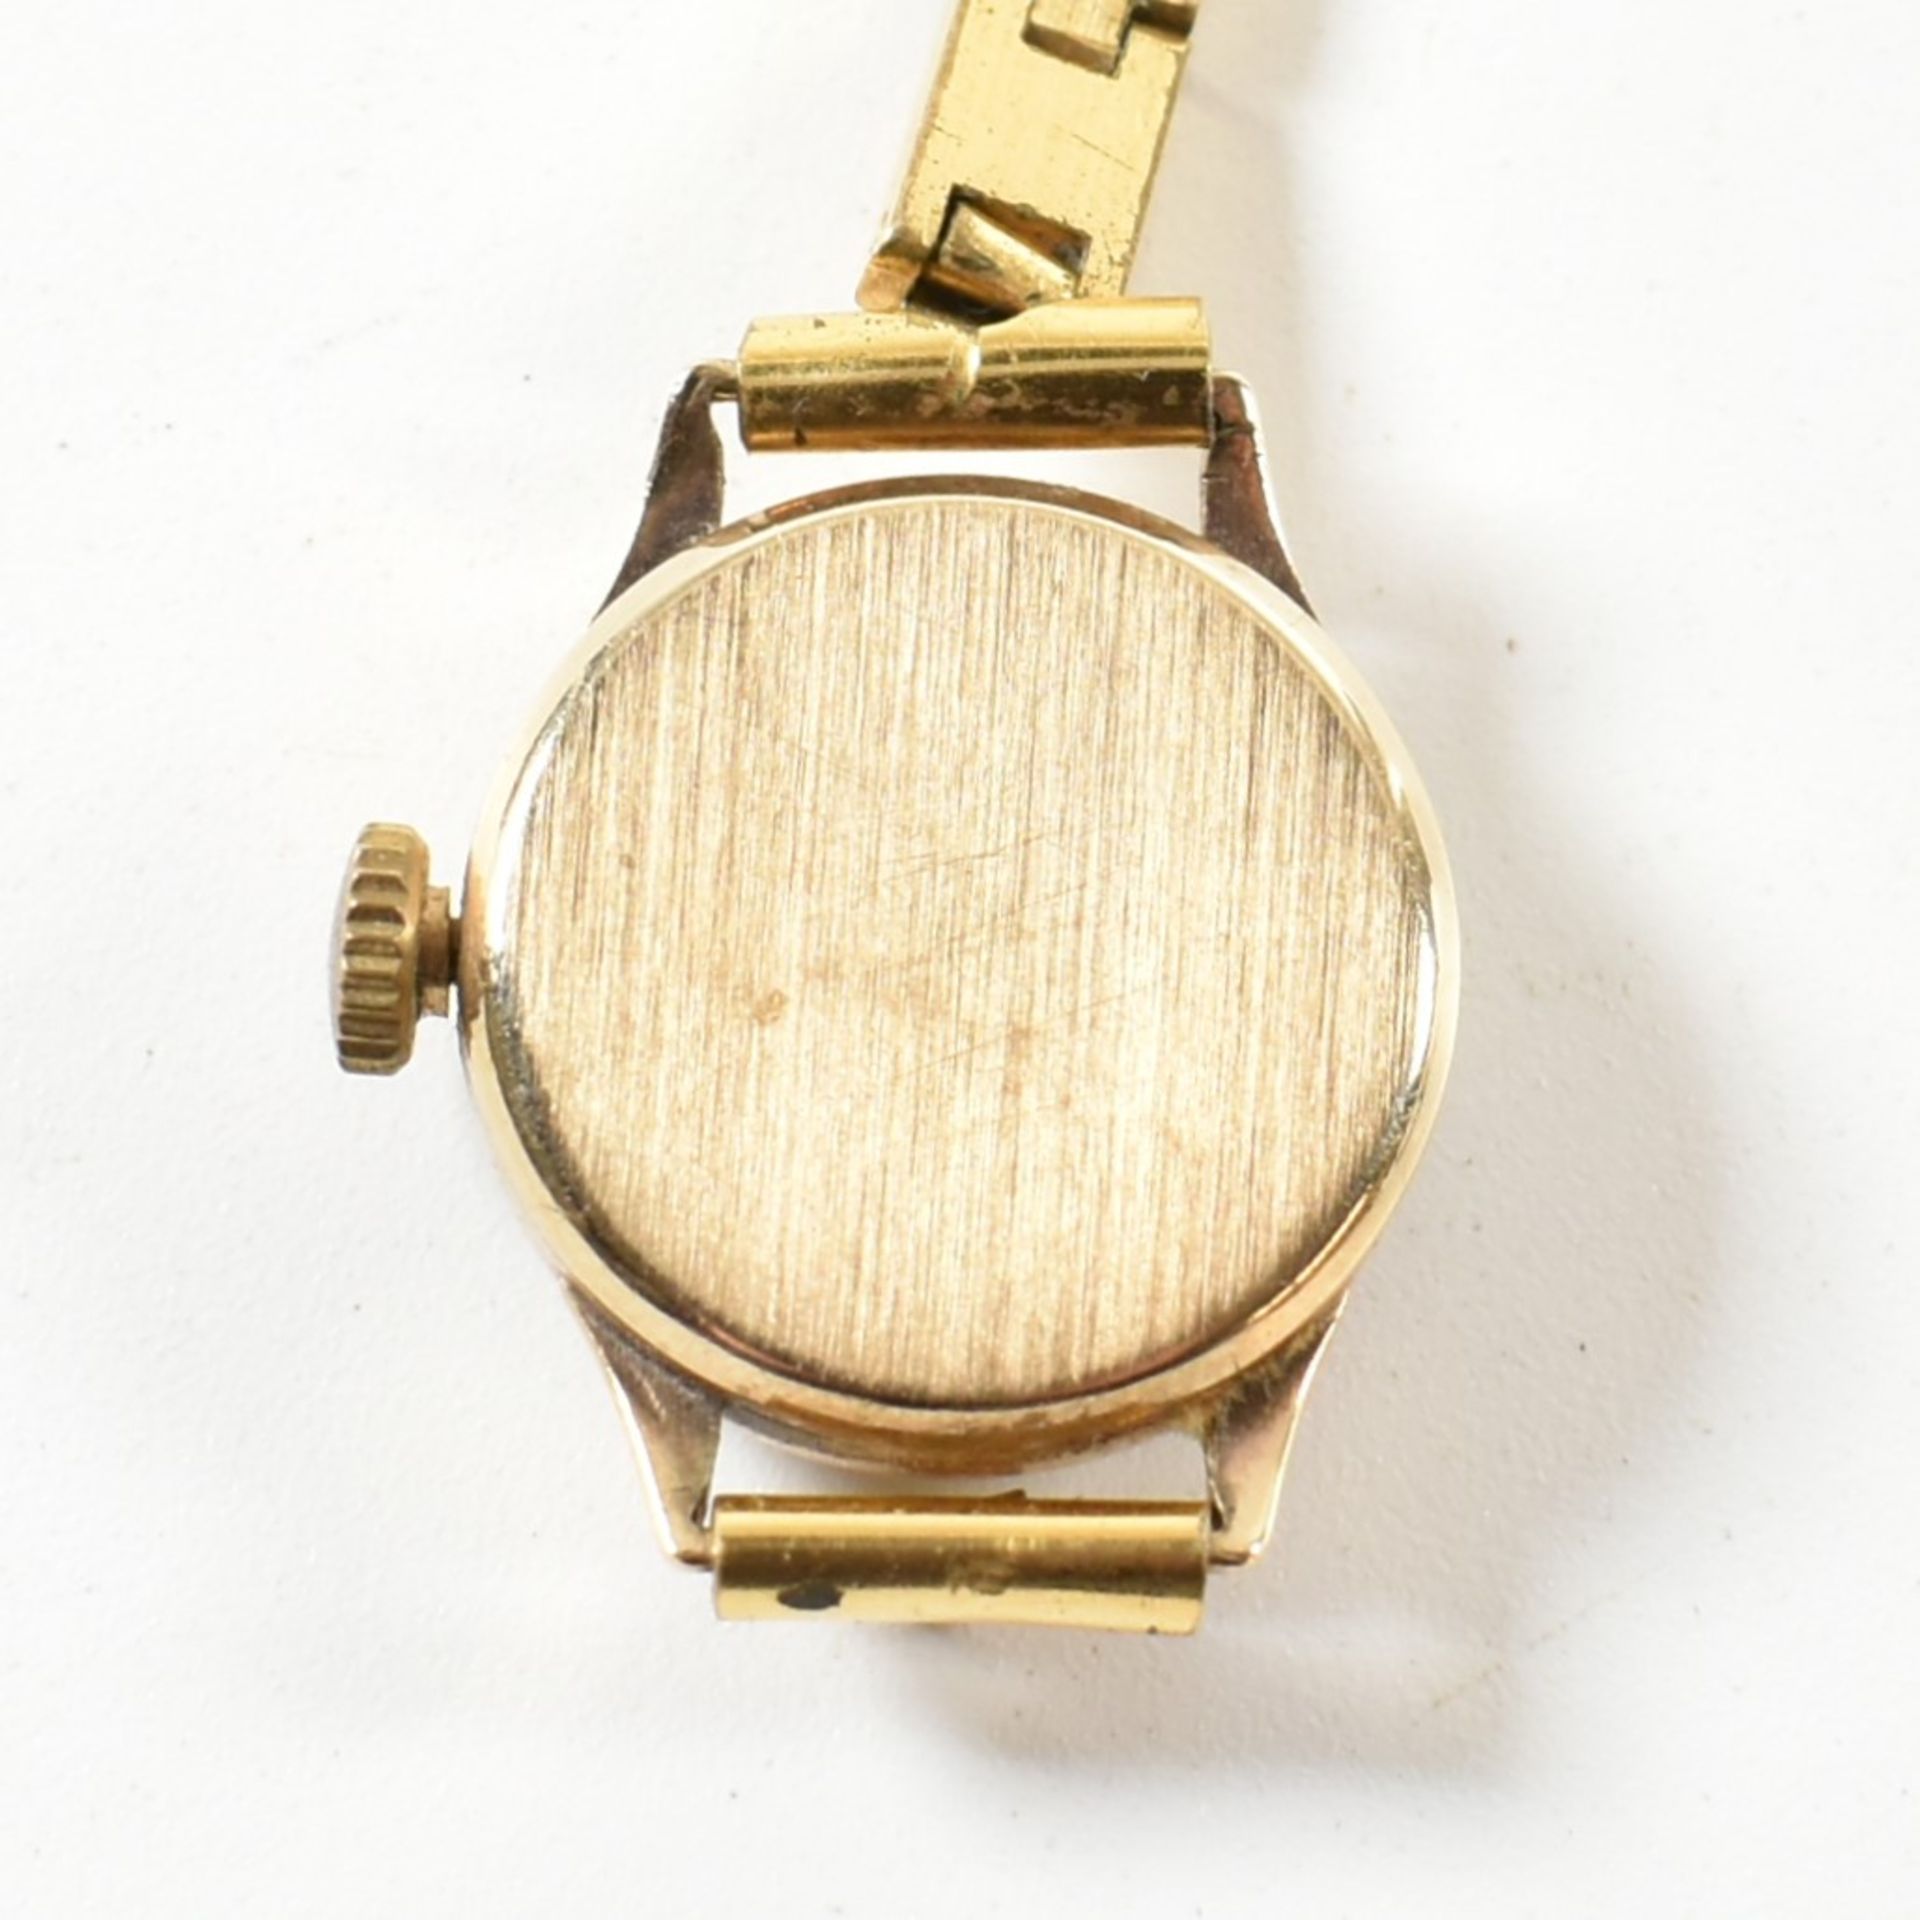 HALLMARKED 9CT GOLD OMEGA WATCH ON GILDED STRAP - Image 2 of 5